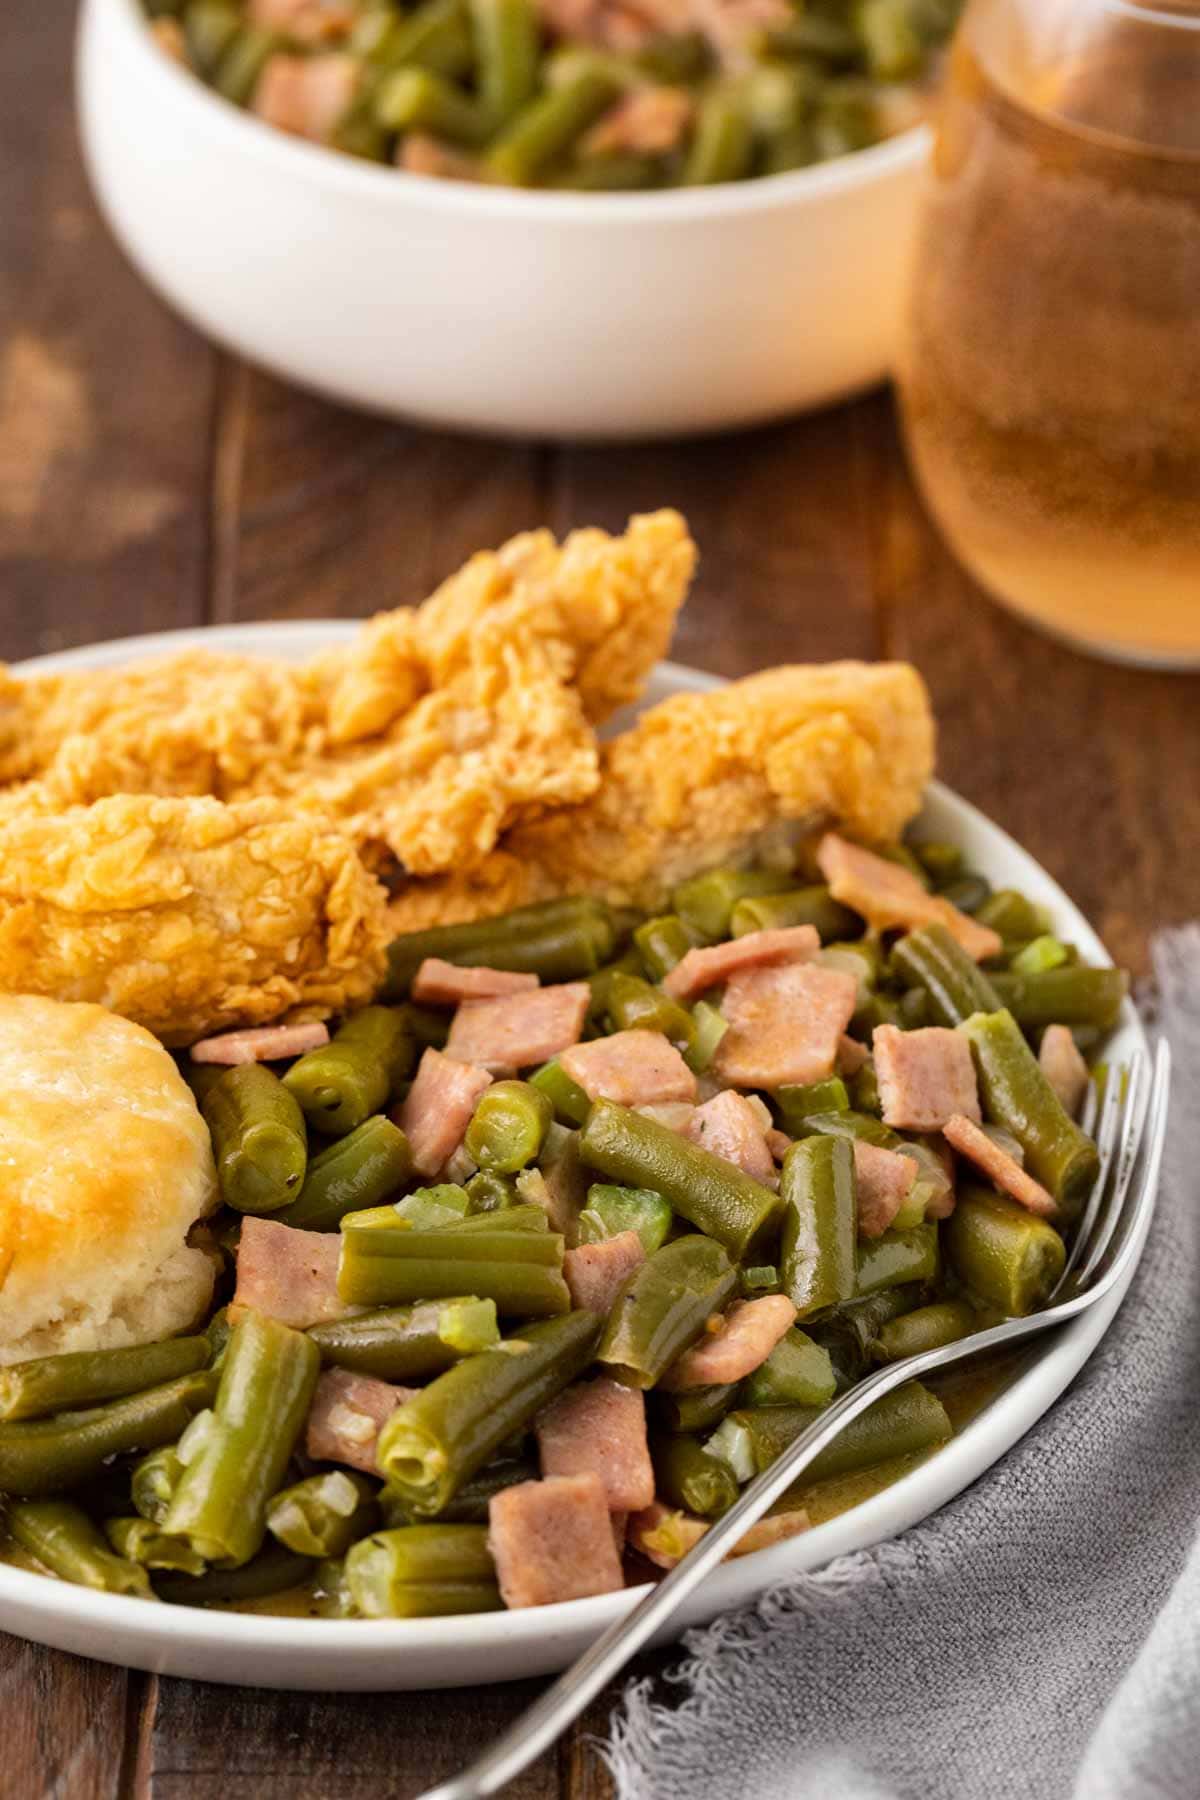 Popeye's Green Beans on plate with fried chicken and biscuit